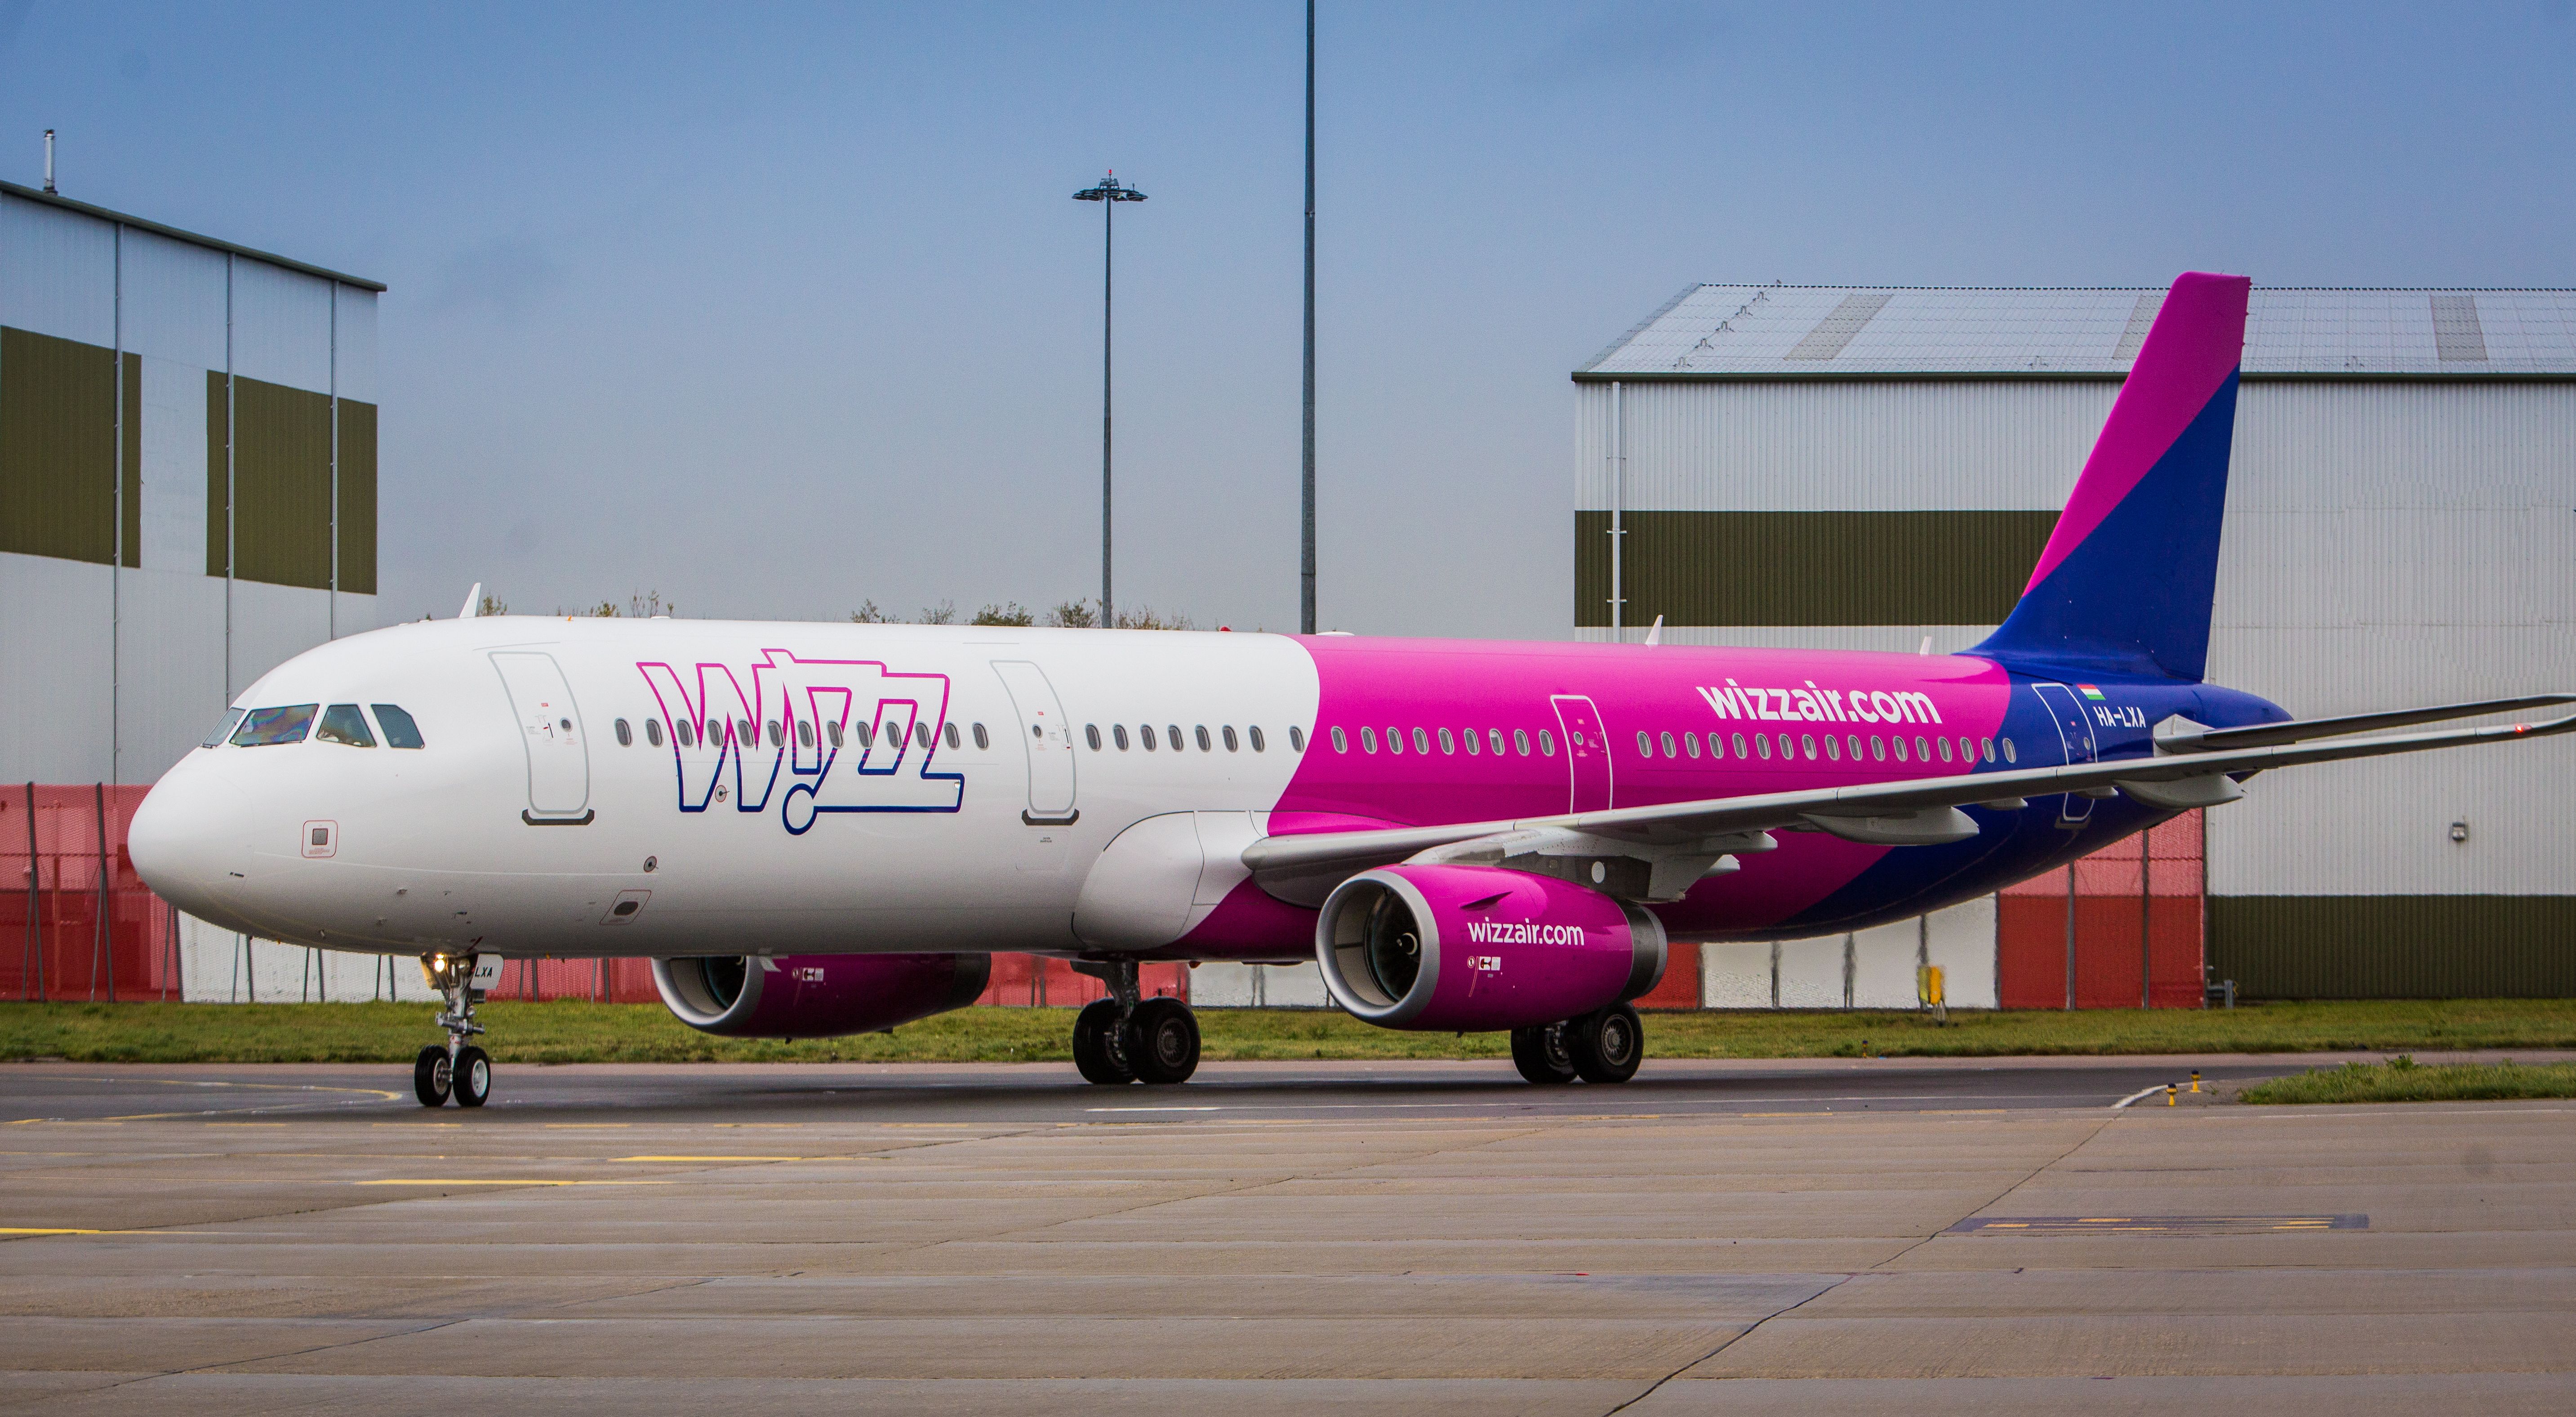 Wizz Air A321 on the ground